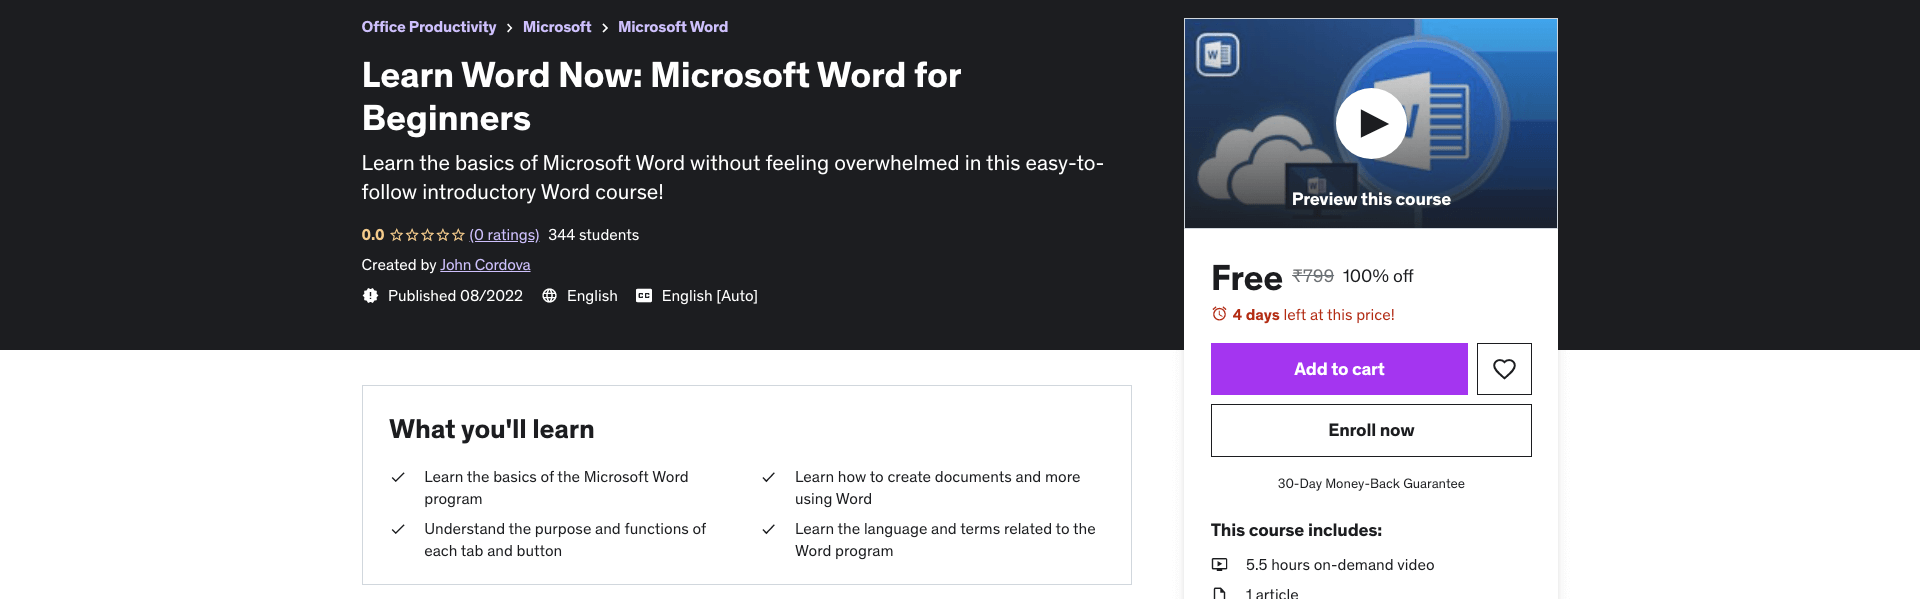 Learn Word Now: Microsoft Word for Beginners